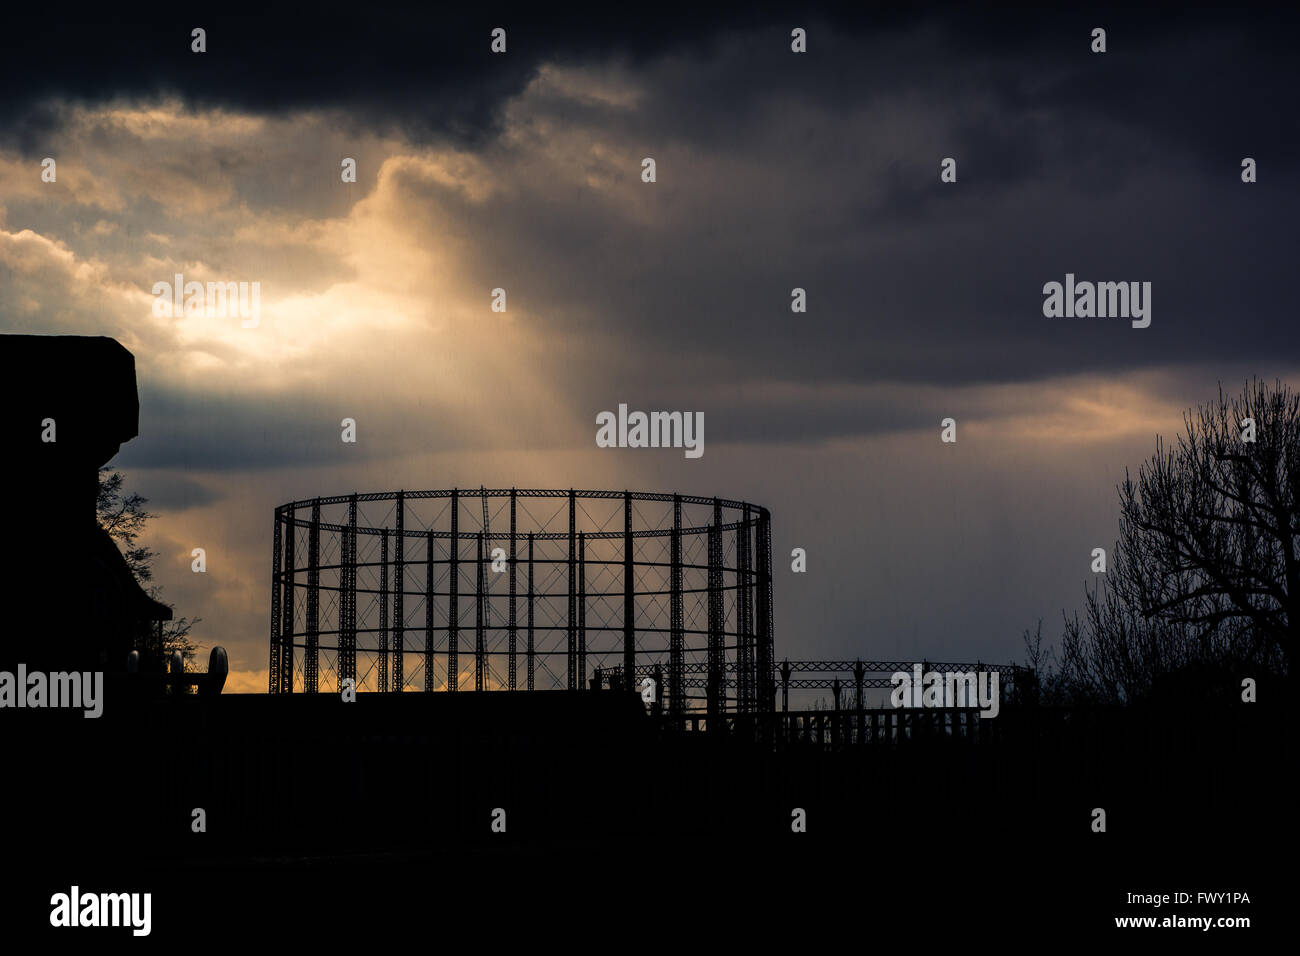 Kensal Green gasometer silhouetted in front of storm, part of the former Kensington Gas Works, in north-west London, England, UK Stock Photo